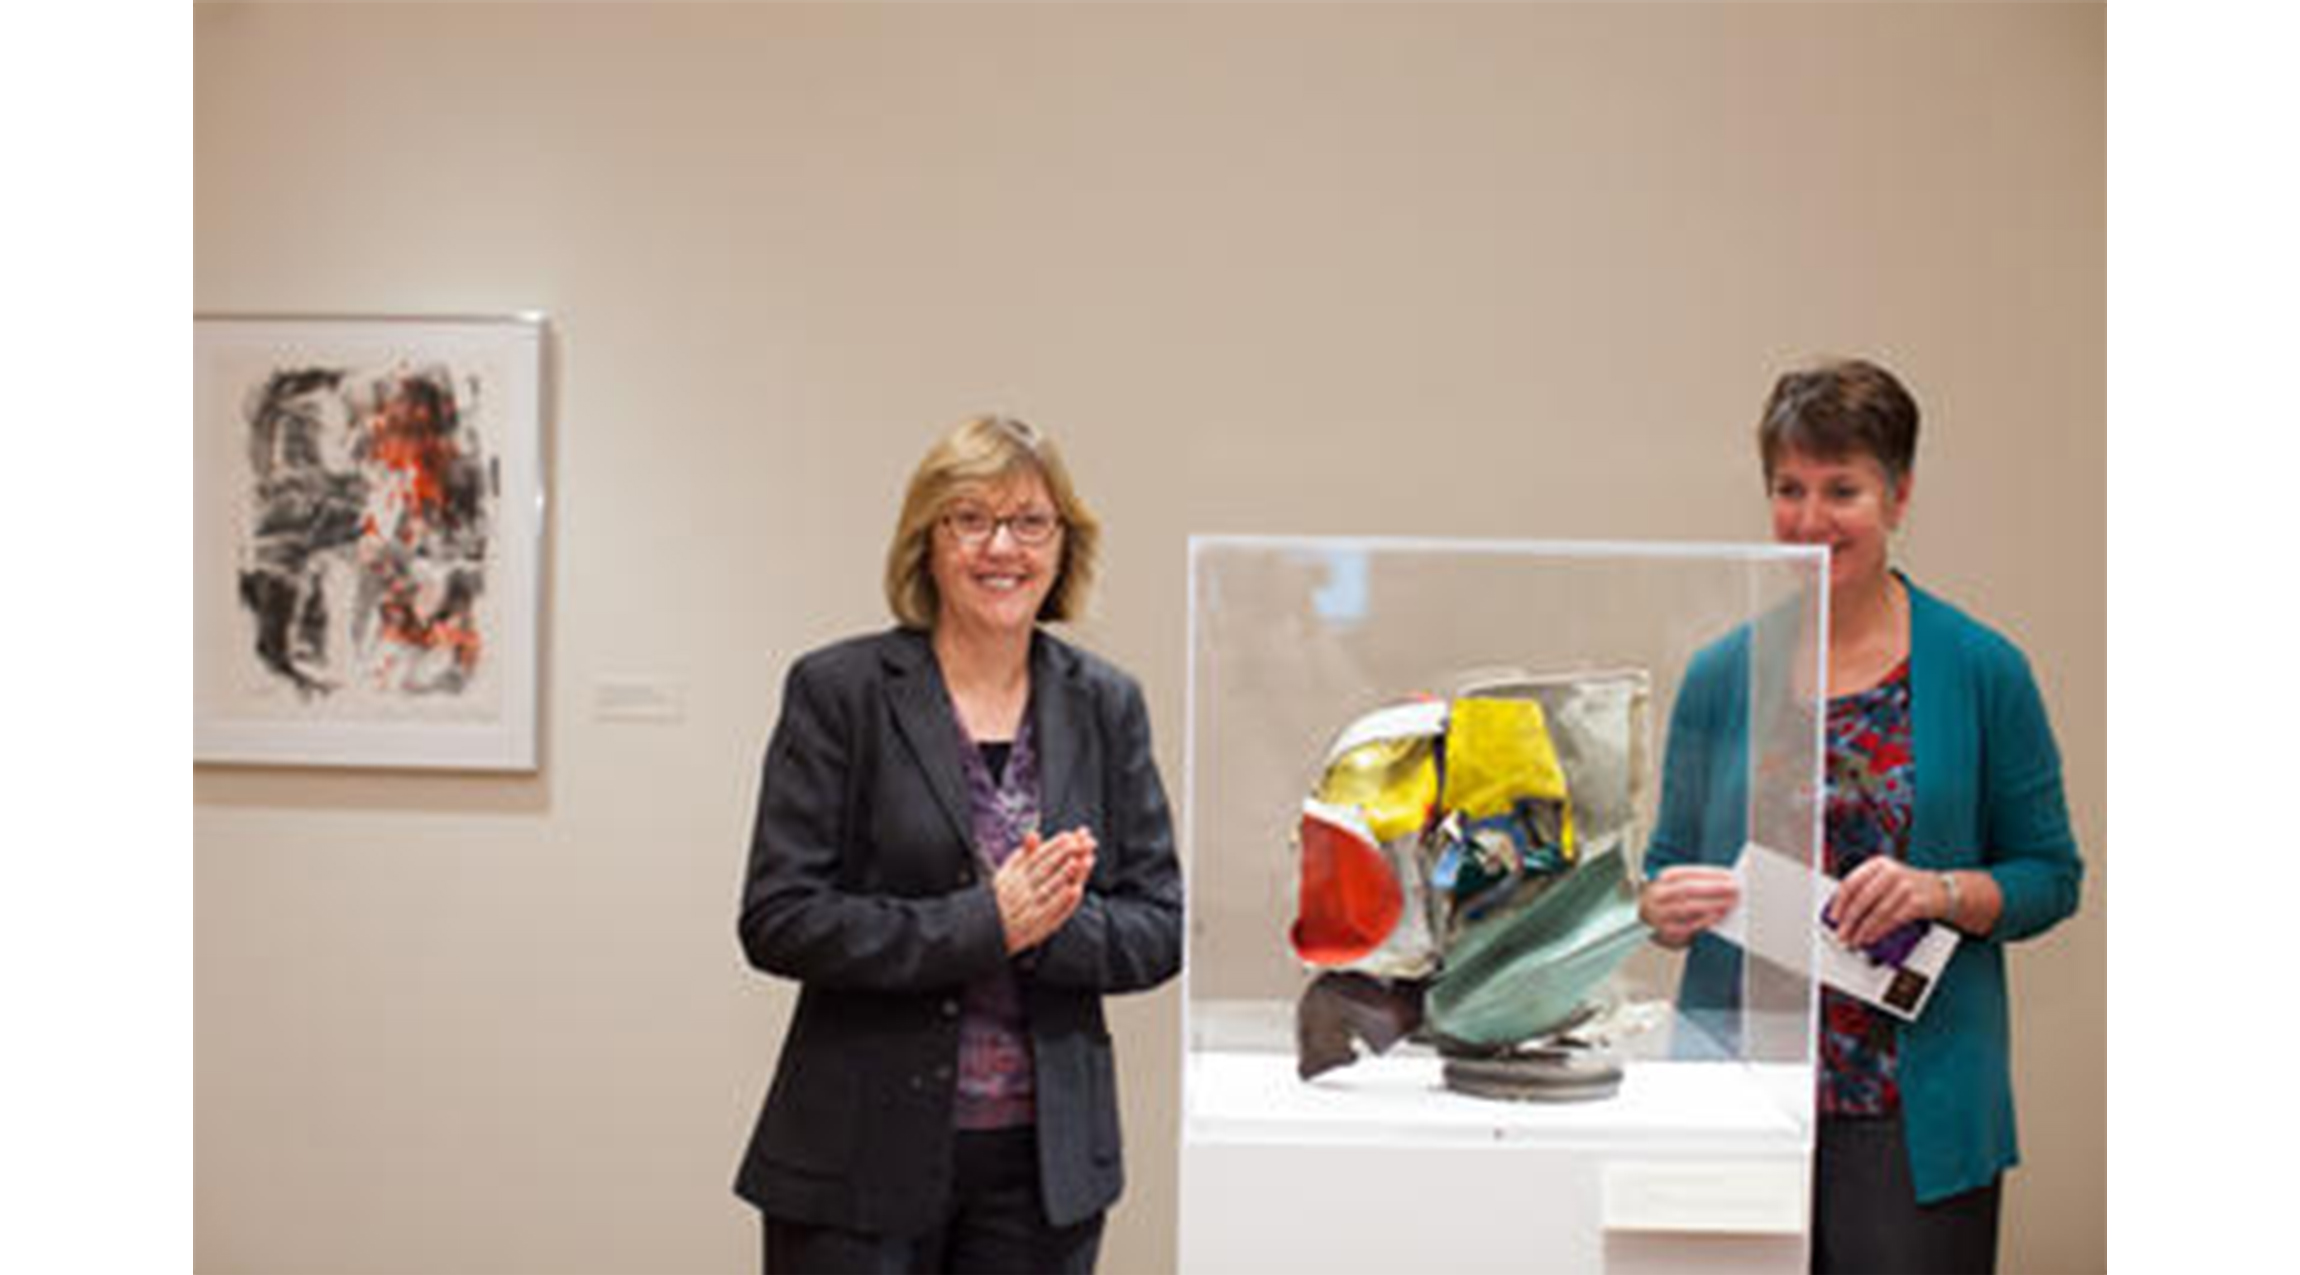 two women stand in an art gallery, looking at a glass case with a blue, yellow, and red sculpture inside of it. abstract painting on the wall behind them